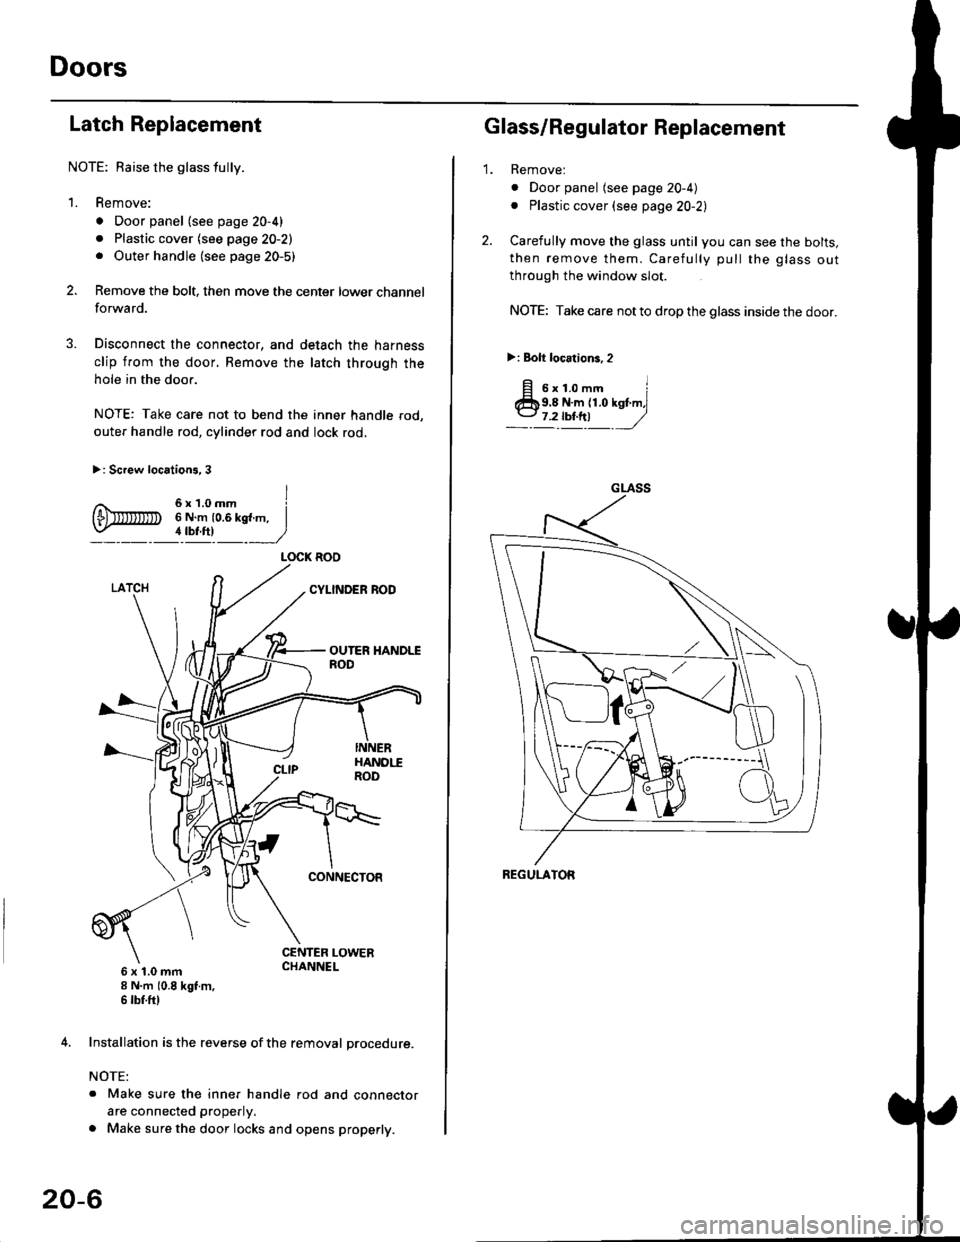 HONDA CIVIC 2000 6.G Workshop Manual Doors
Latch Replacement
NOTE: Baise the glass fully.
1. Remove:
. Door panel (see page 20-4)
. Plastic cover (see page 20-2). Outer handle (see page 20-5)
Remove the bolt, then move the center lower c